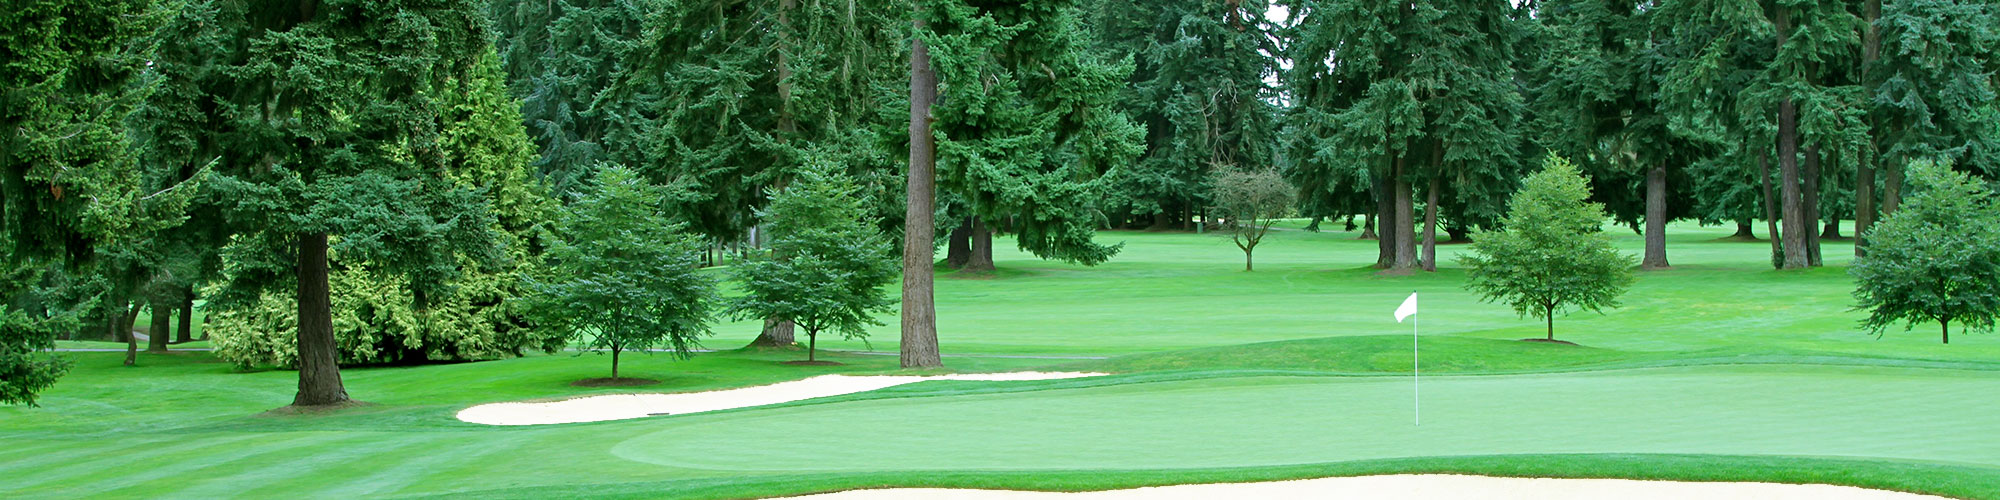 green golf course in the northwest